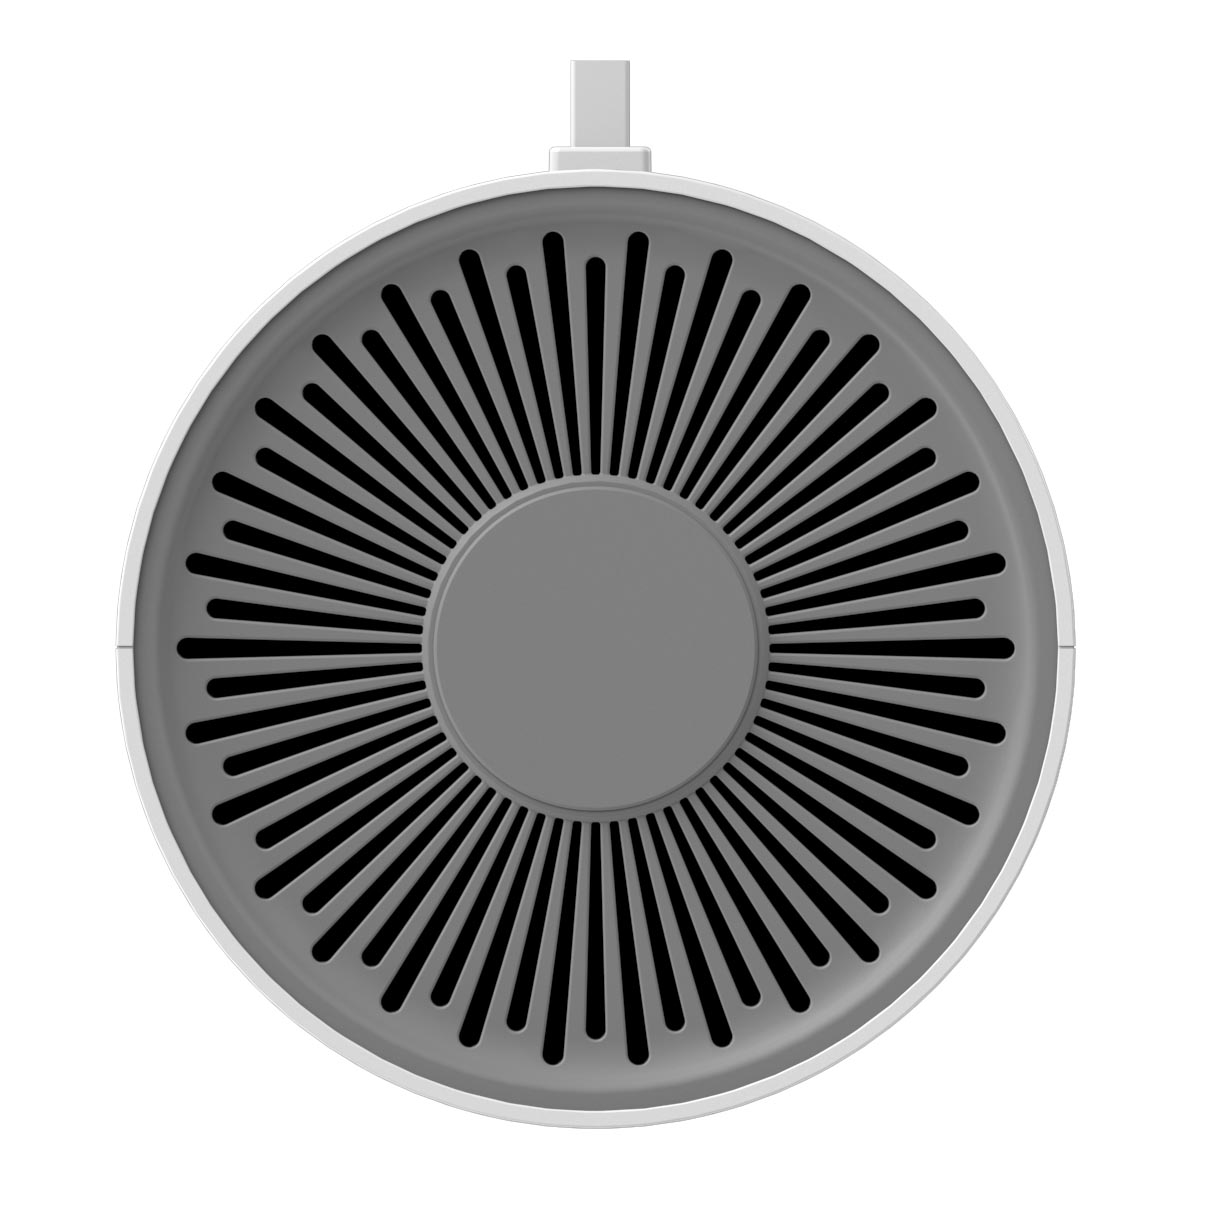 AM-080 Air Purifier for Home 3-in-1 True HEPA Filter Air Cleaner for Bedroom and Office